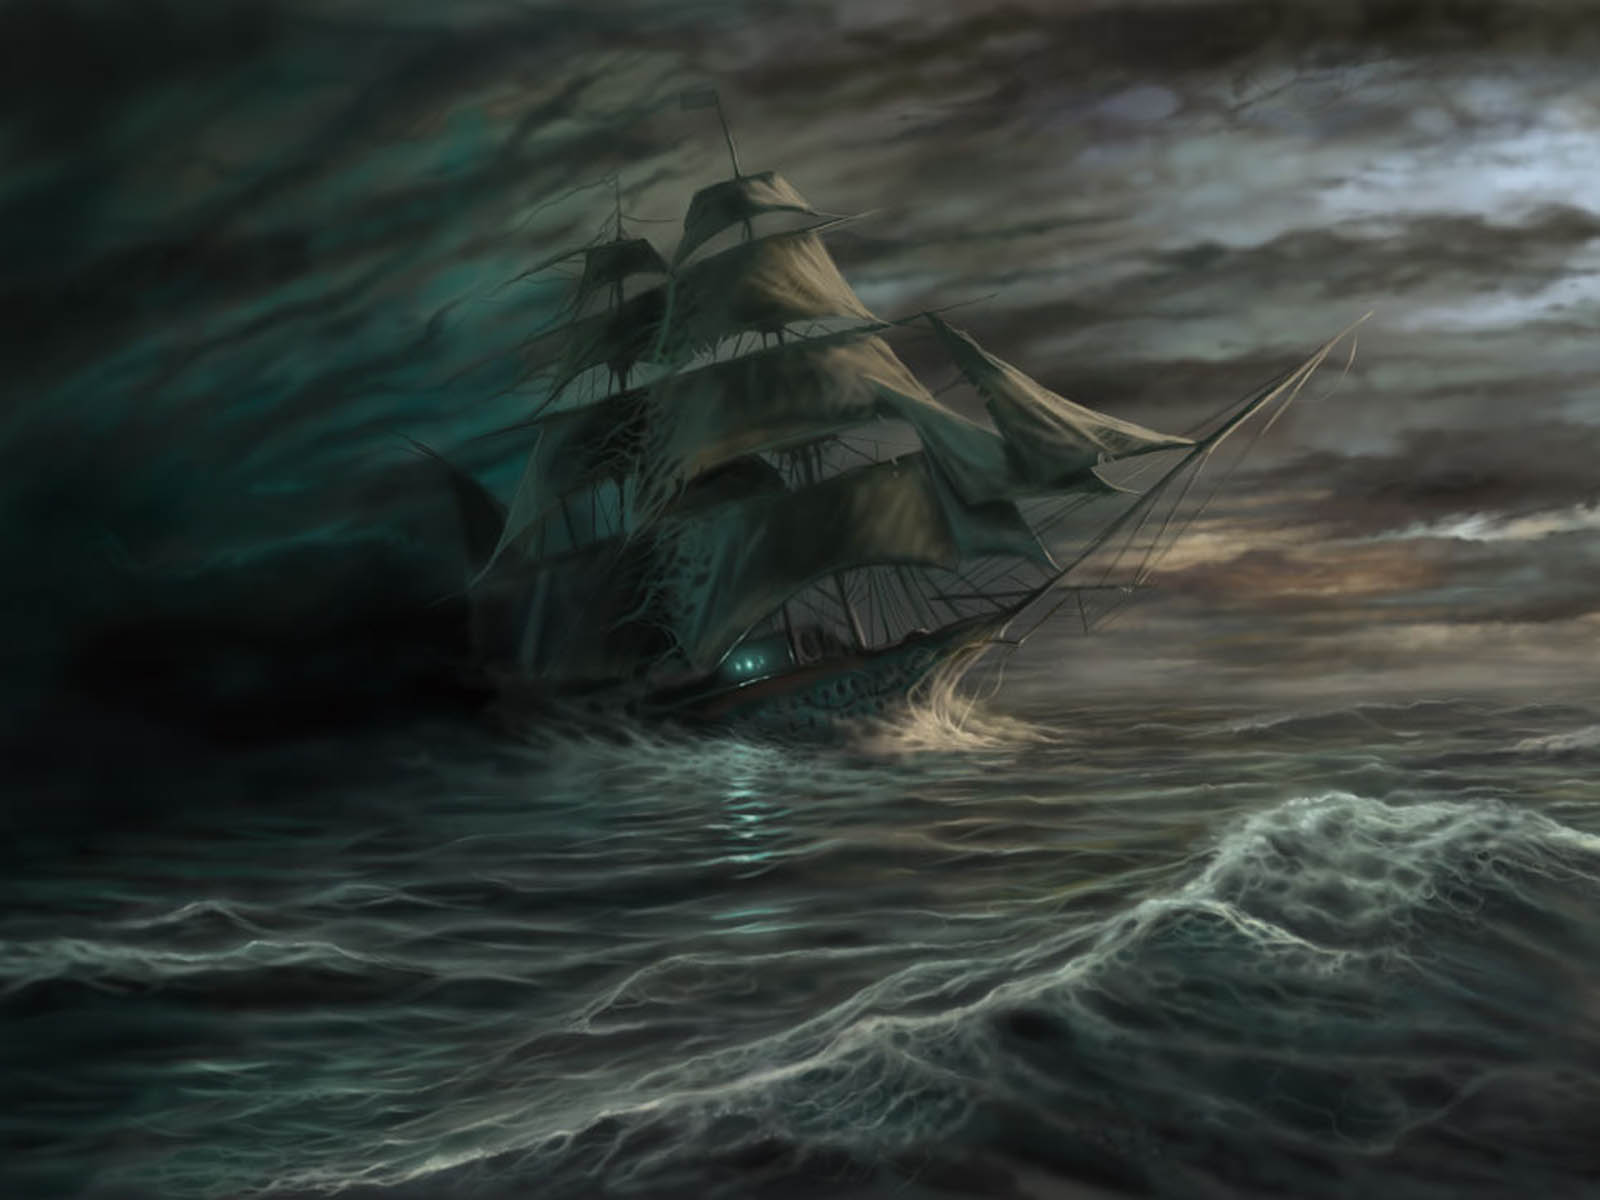 wallpapers: Ghost Ship